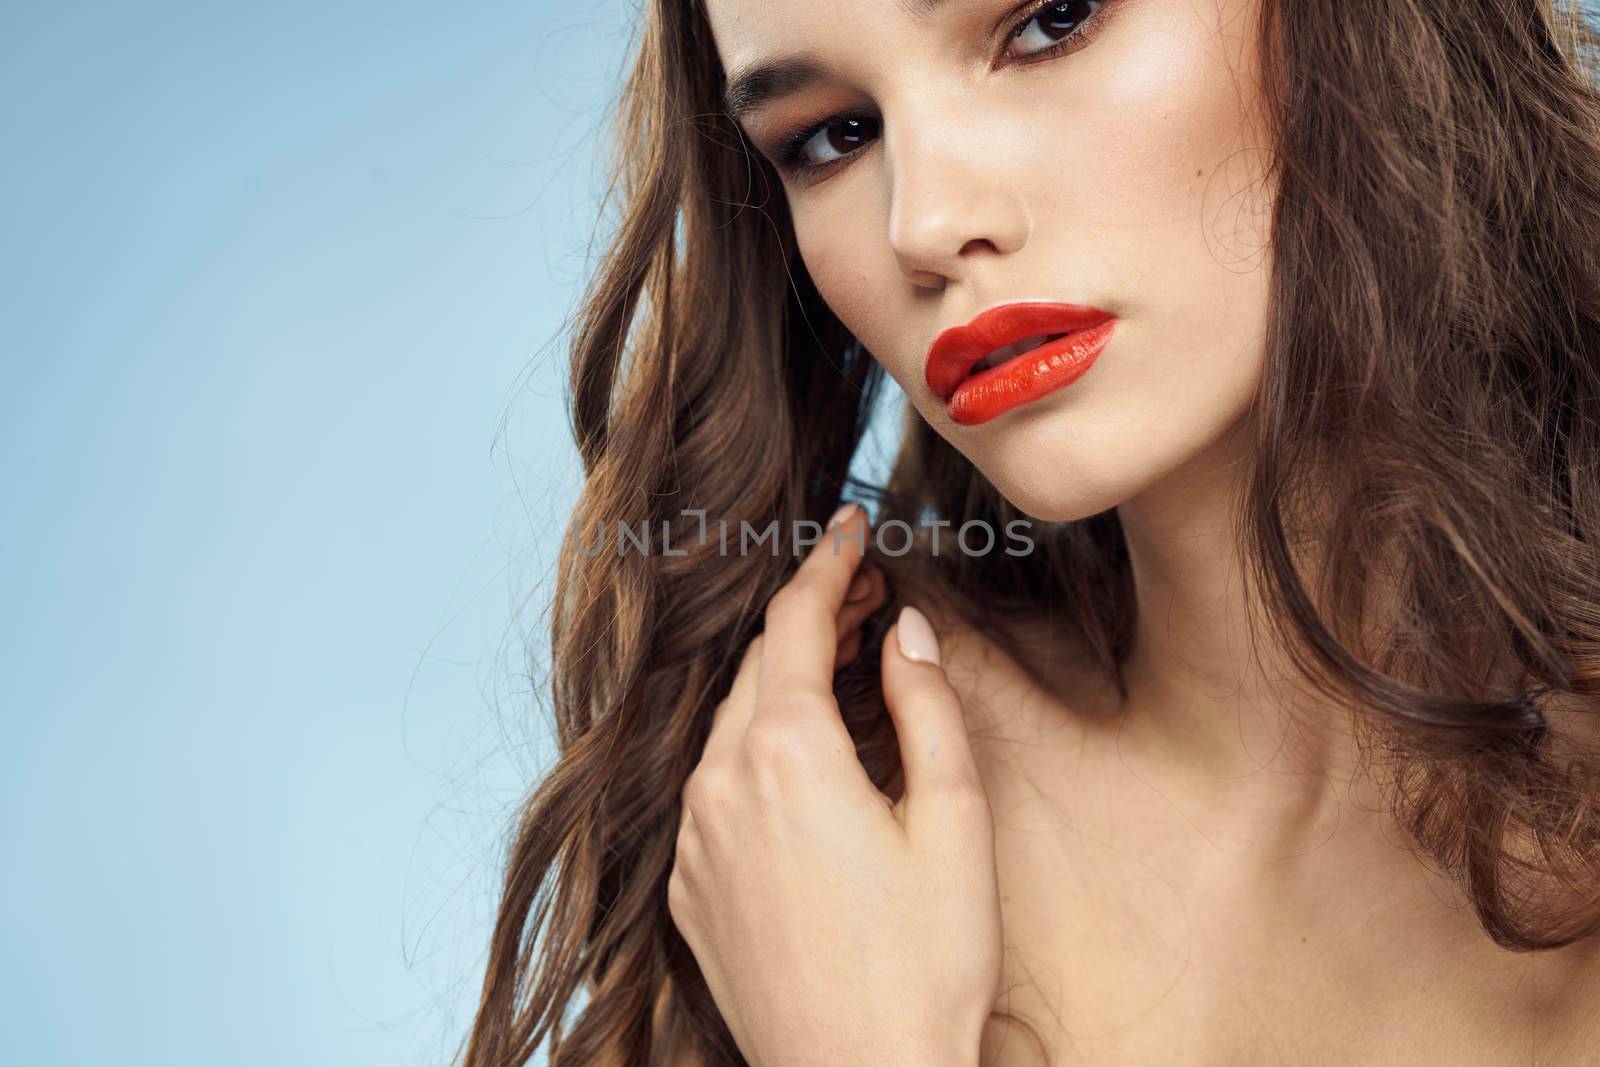 Beautiful woman naked shoulders hairstyle care bright makeup blue background. High quality photo